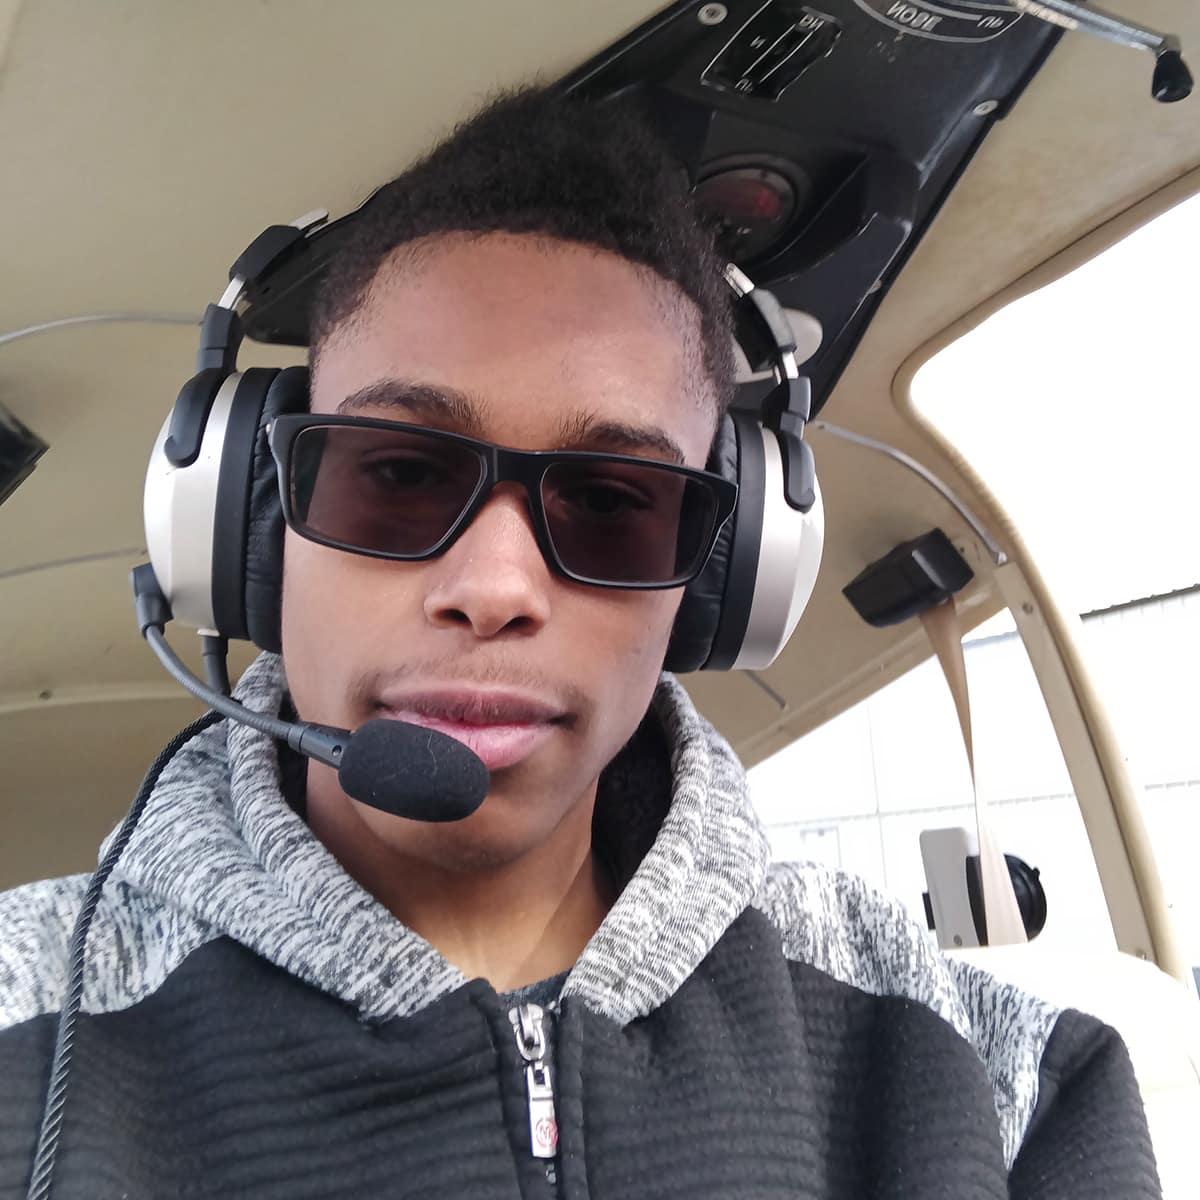 With headset in place, Josiah Moise is ready to add some more flight time to the growing total in his pilot logbook. 